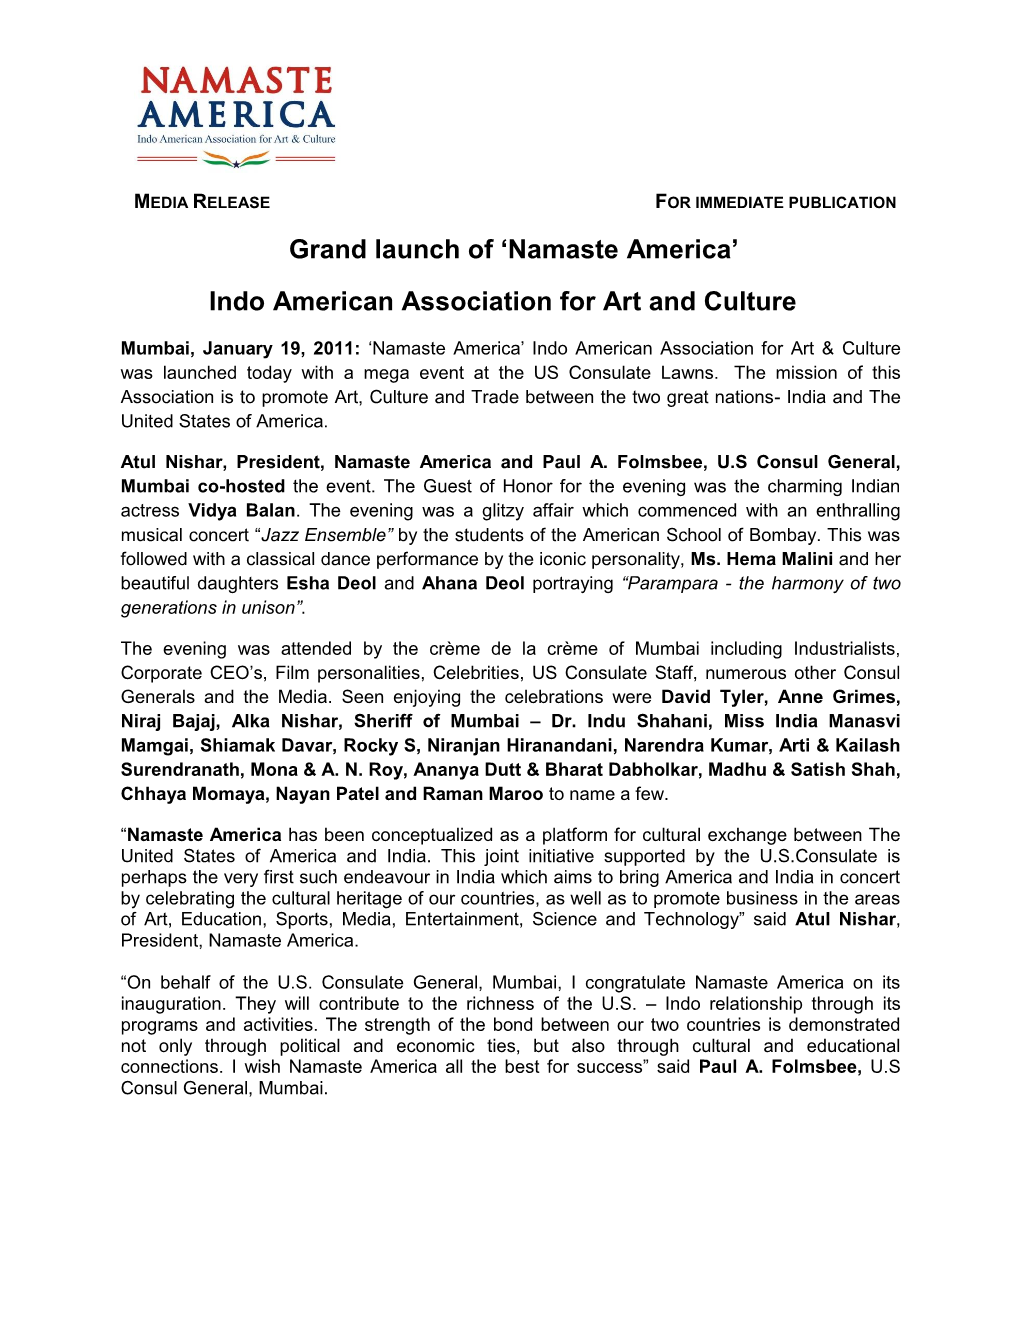 Grand Launch of 'Namaste America' Indo American Association for Art